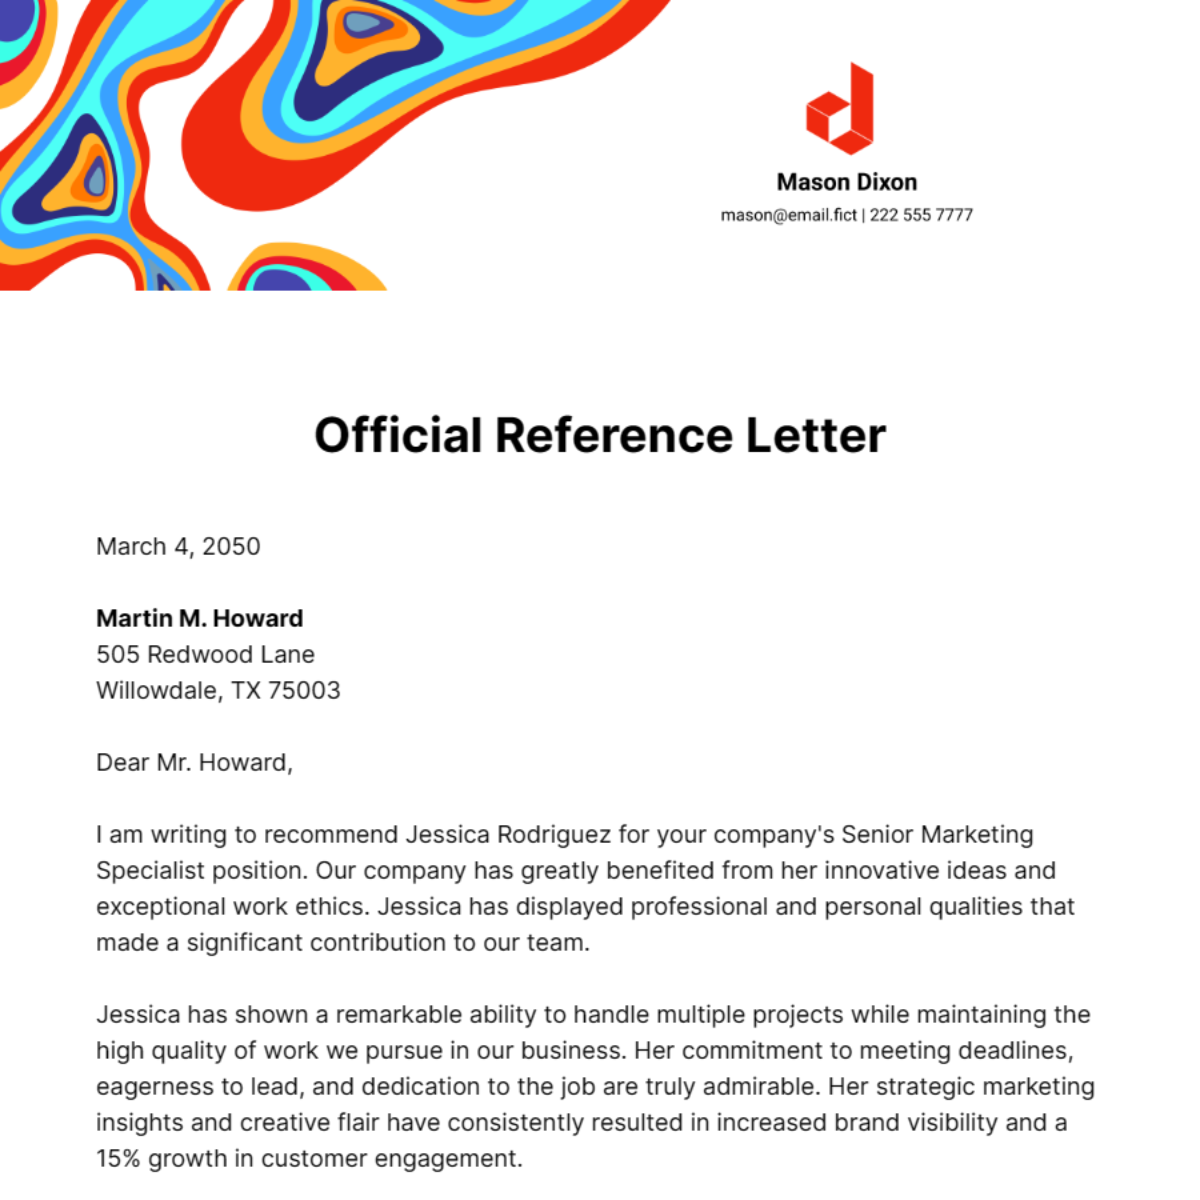 Official Reference Letter Template